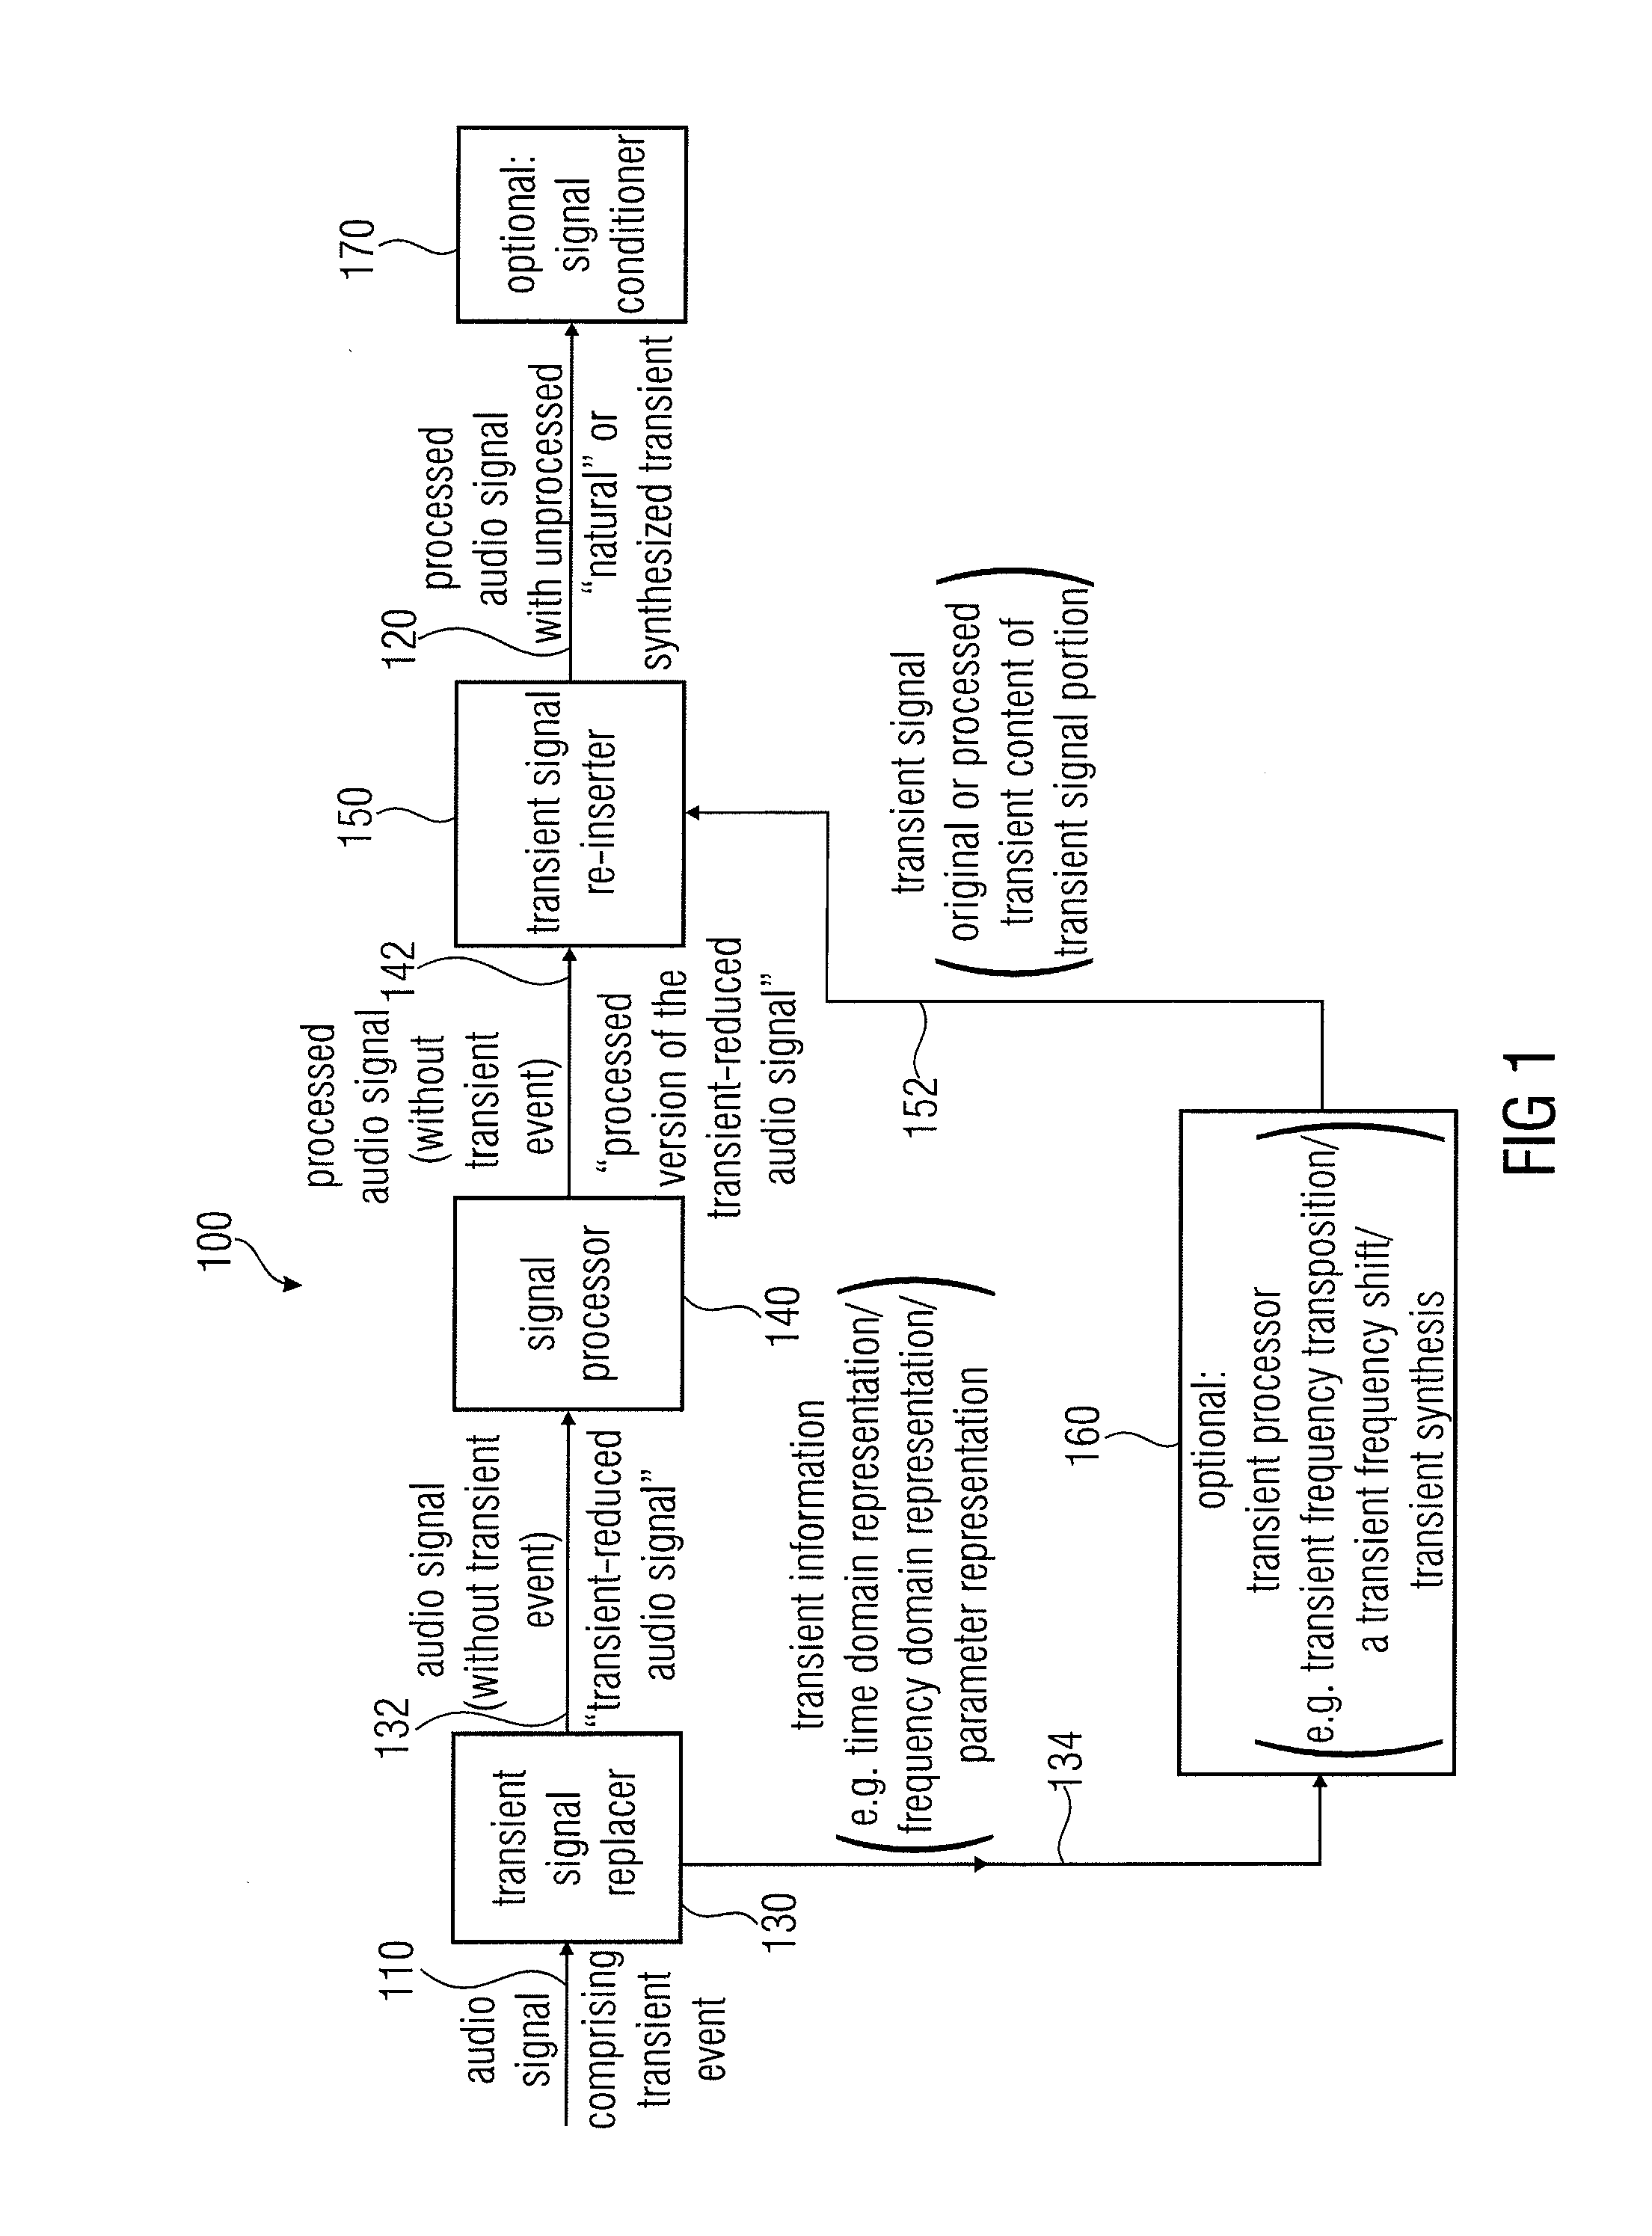 Apparatus, method and computer program for manipulating an audio signal comprising a transient event